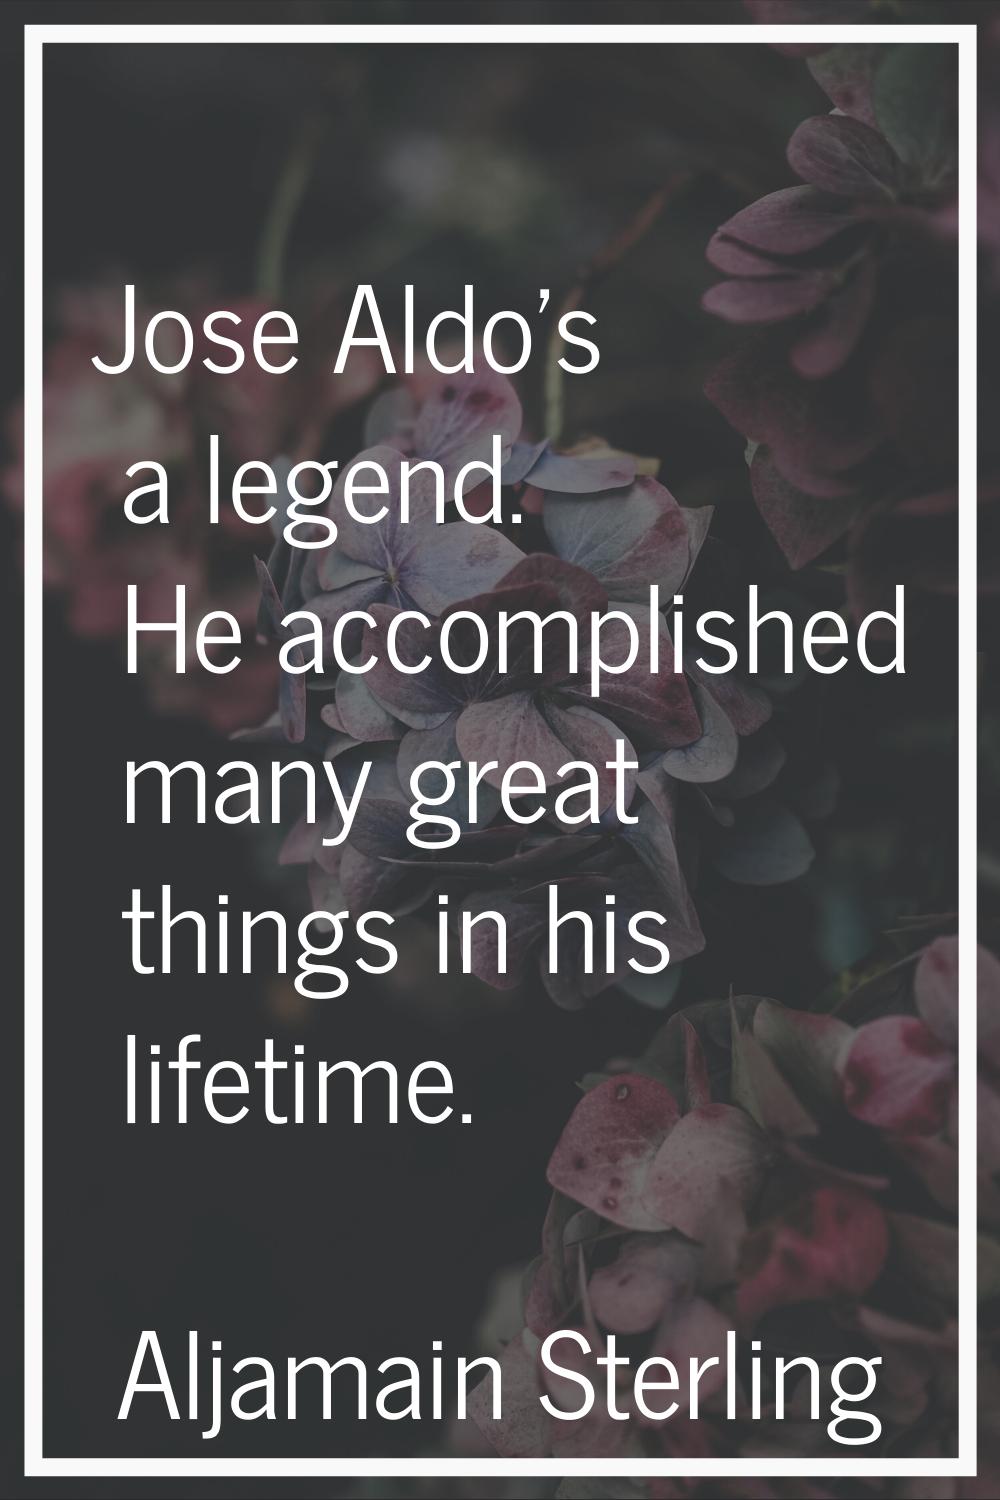 Jose Aldo's a legend. He accomplished many great things in his lifetime.